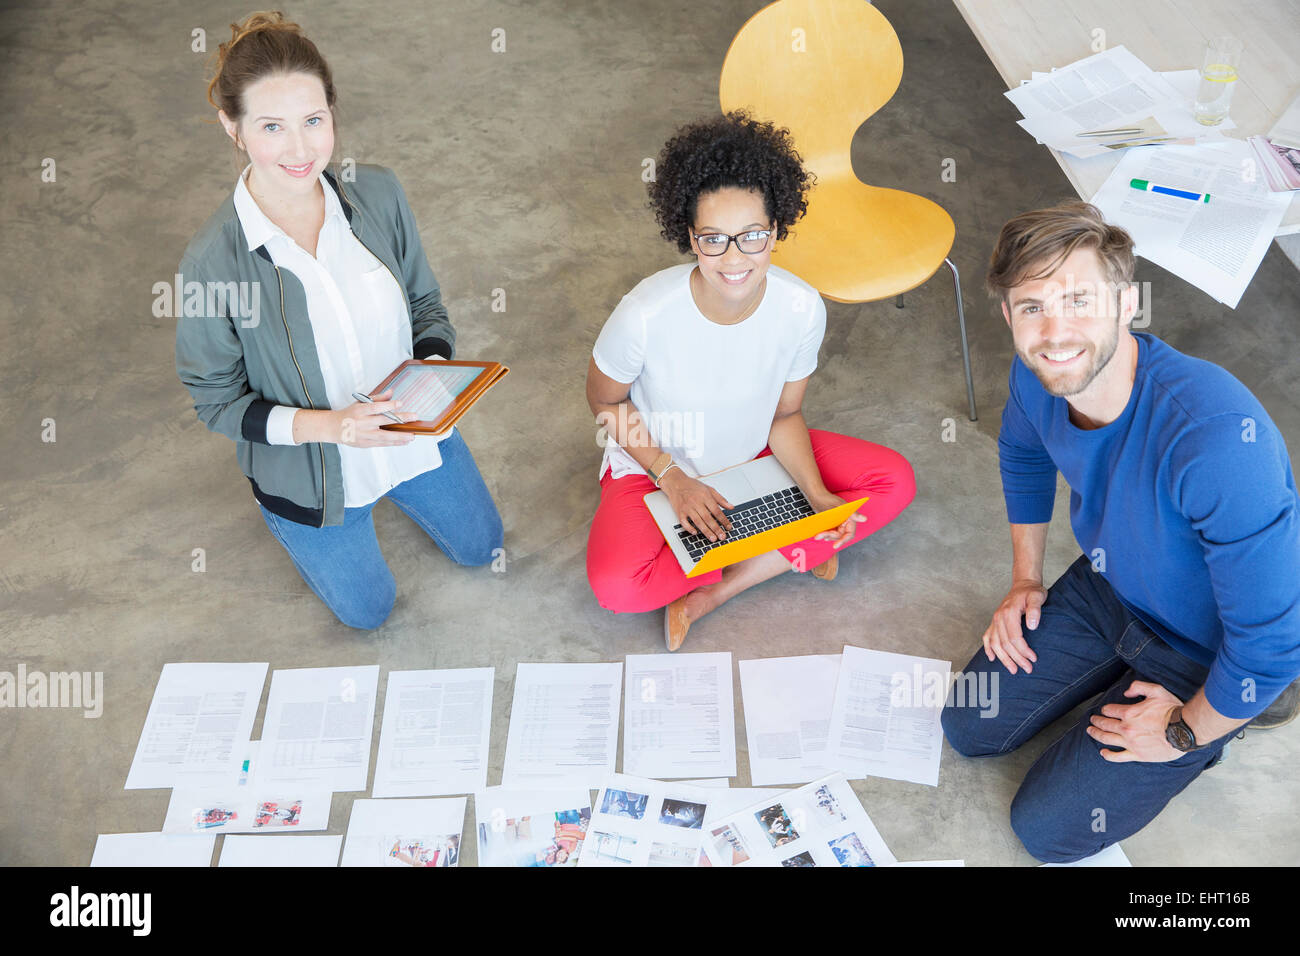 Portrait of three young people sitting on floor and working together in studio Stock Photo